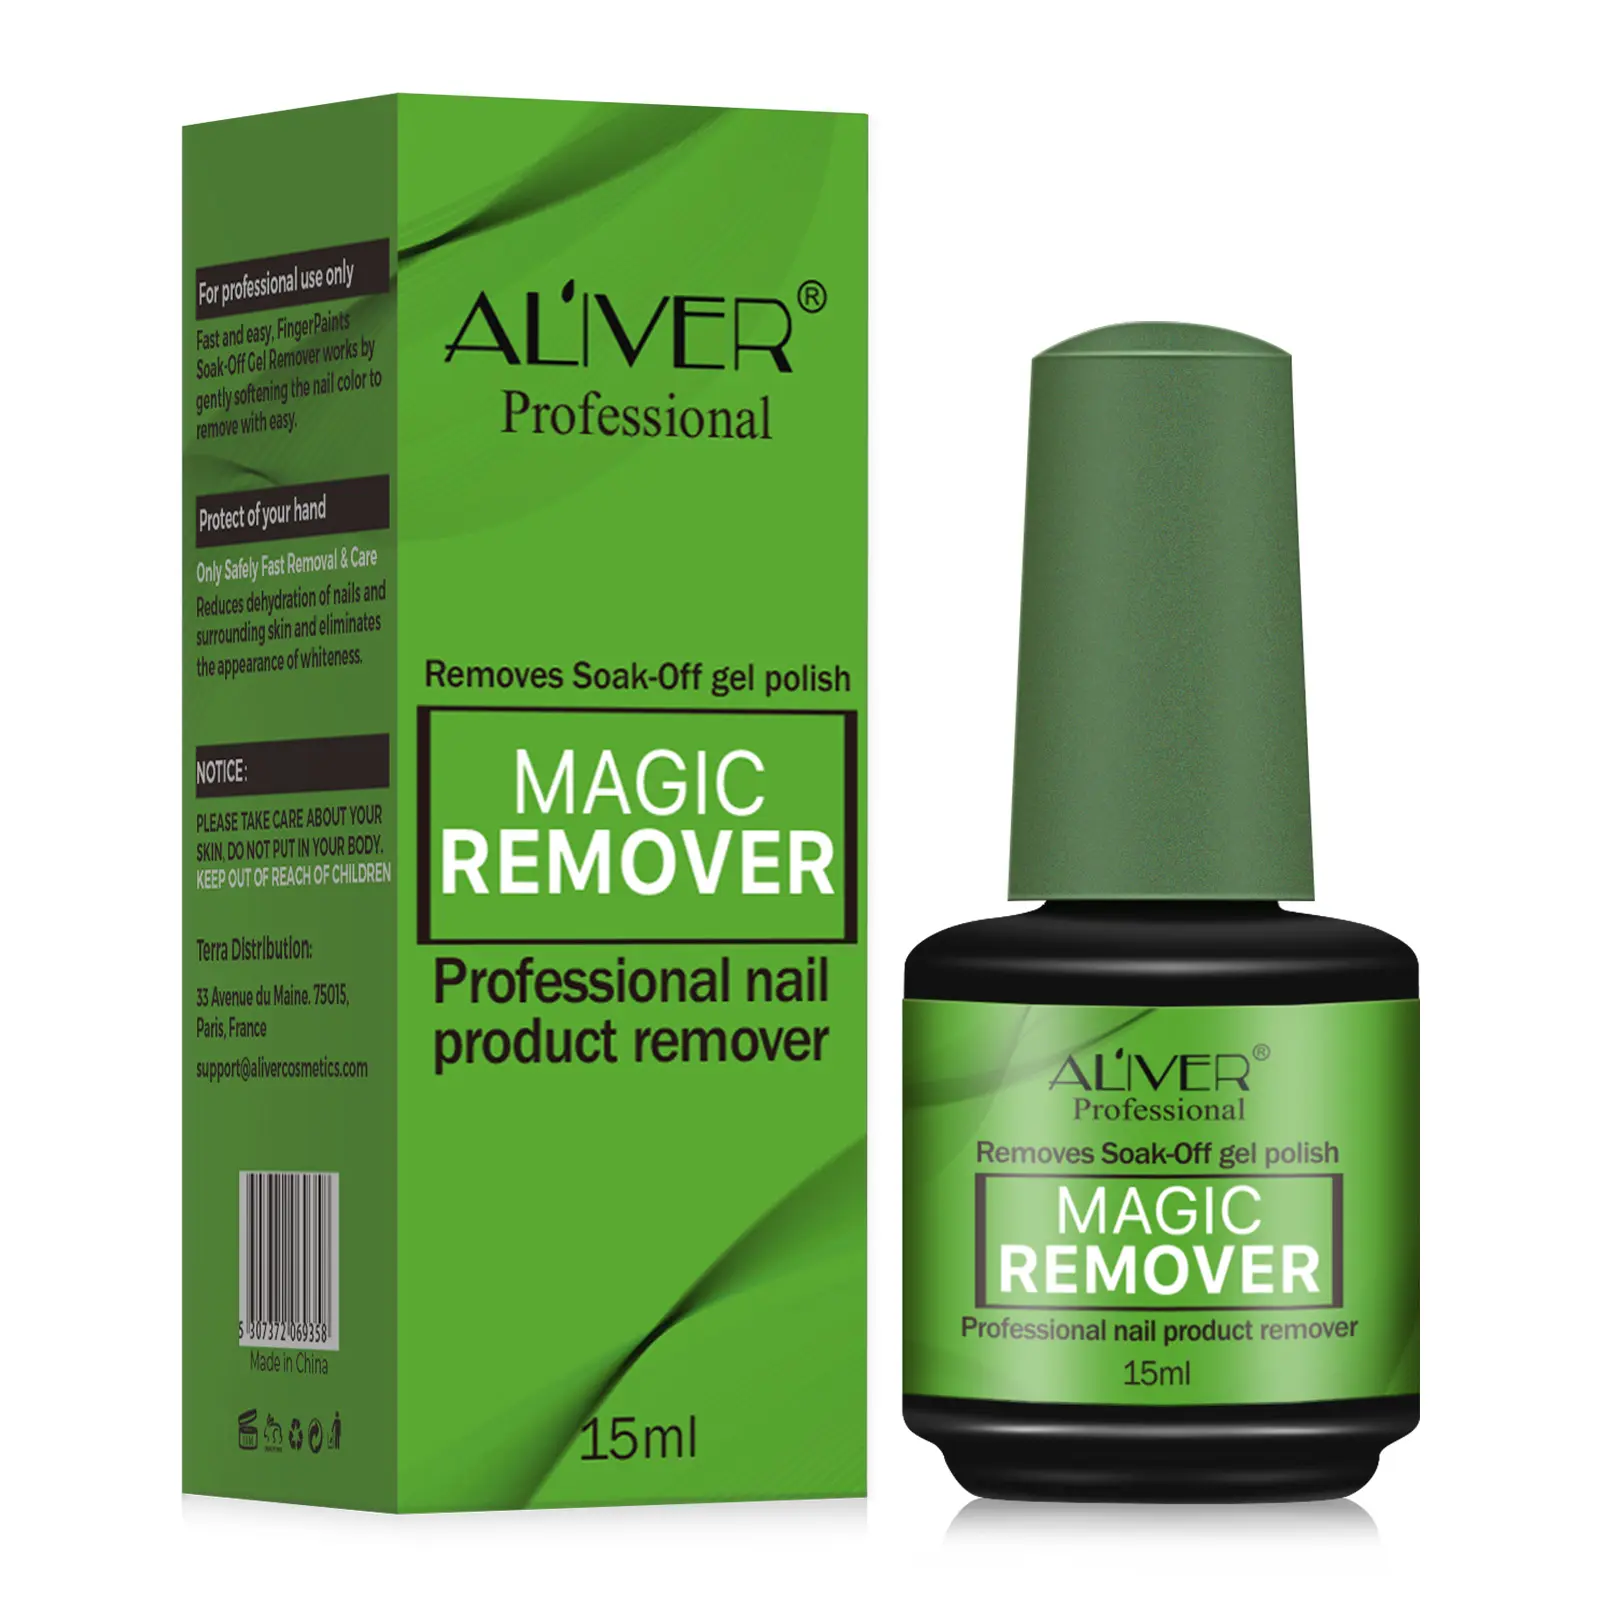 Professional Magic Gel Nail Polish Remover Easily Quickly Removes Soak-Off Gel Nail Polish in 3-5 Minutes